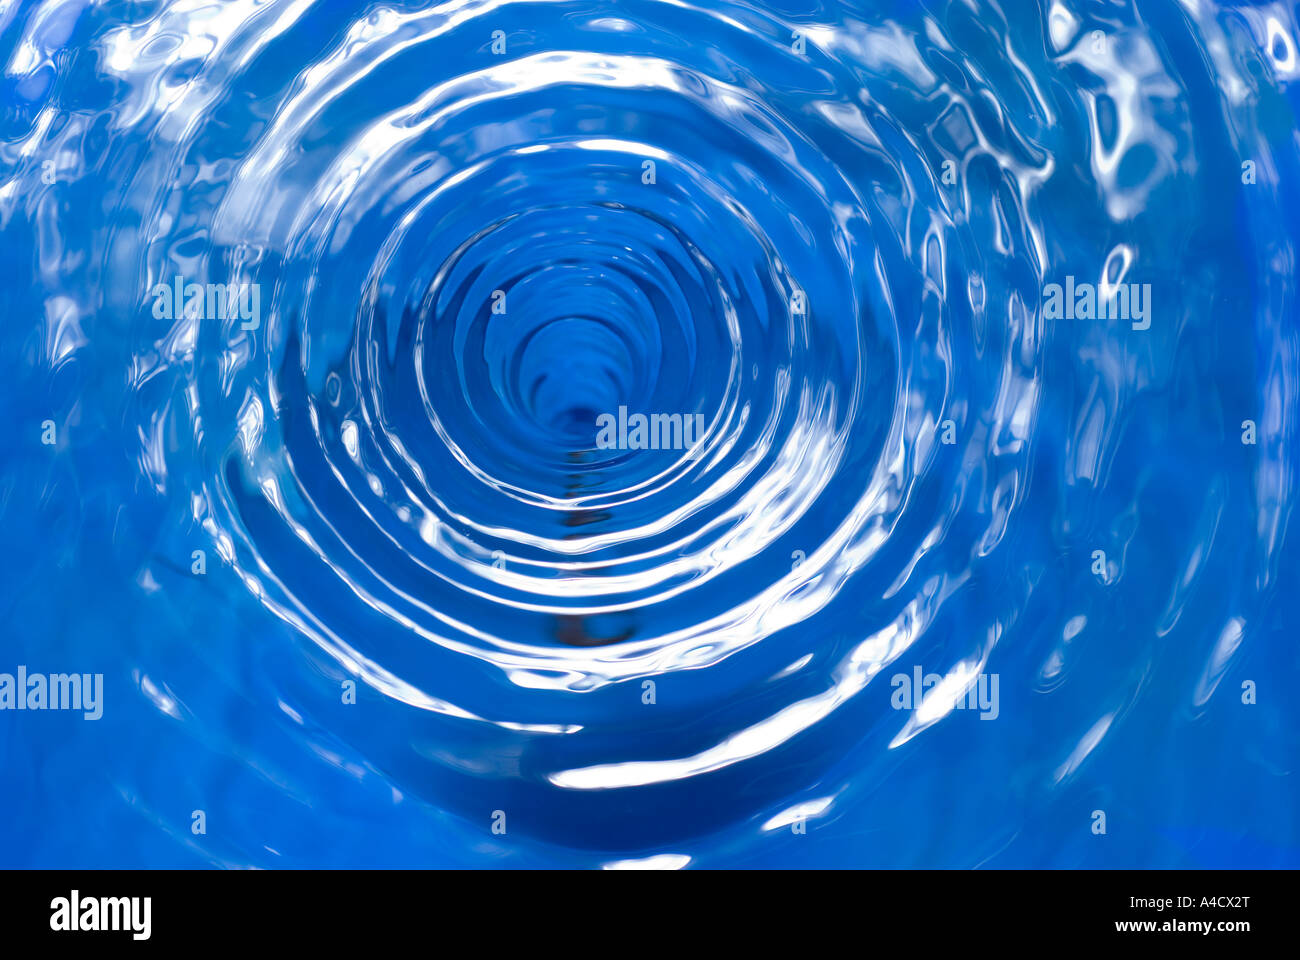 Water vortex - Stock Image - F016/7071 - Science Photo Library